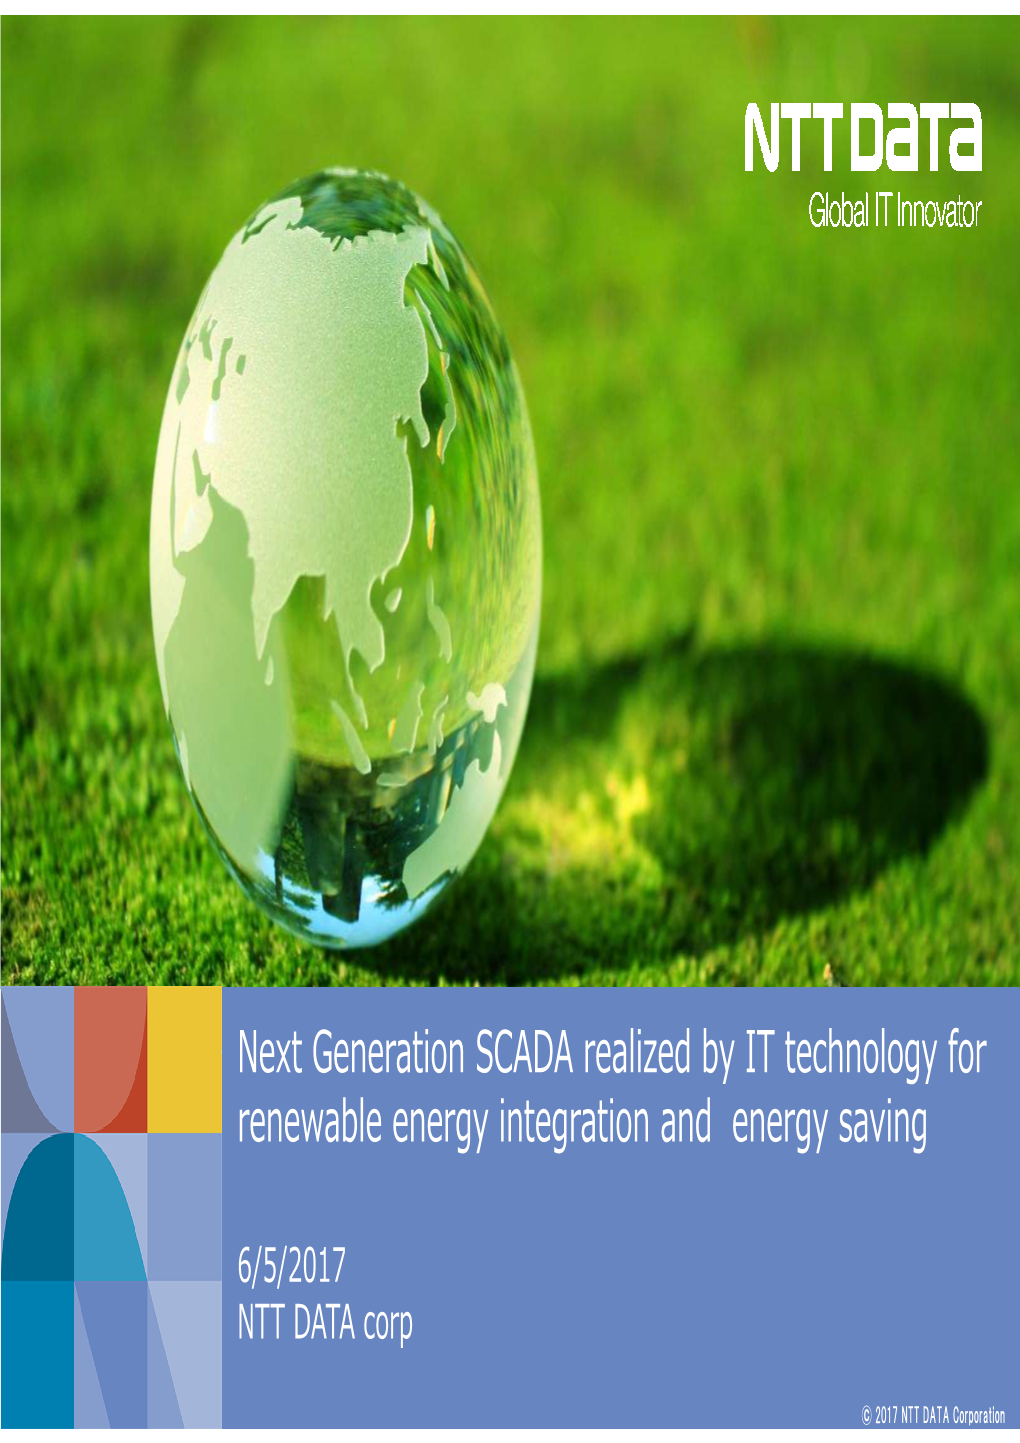 Next Generation SCADA Realized by IT Technology for Renewable Energy Integration and Energy Saving